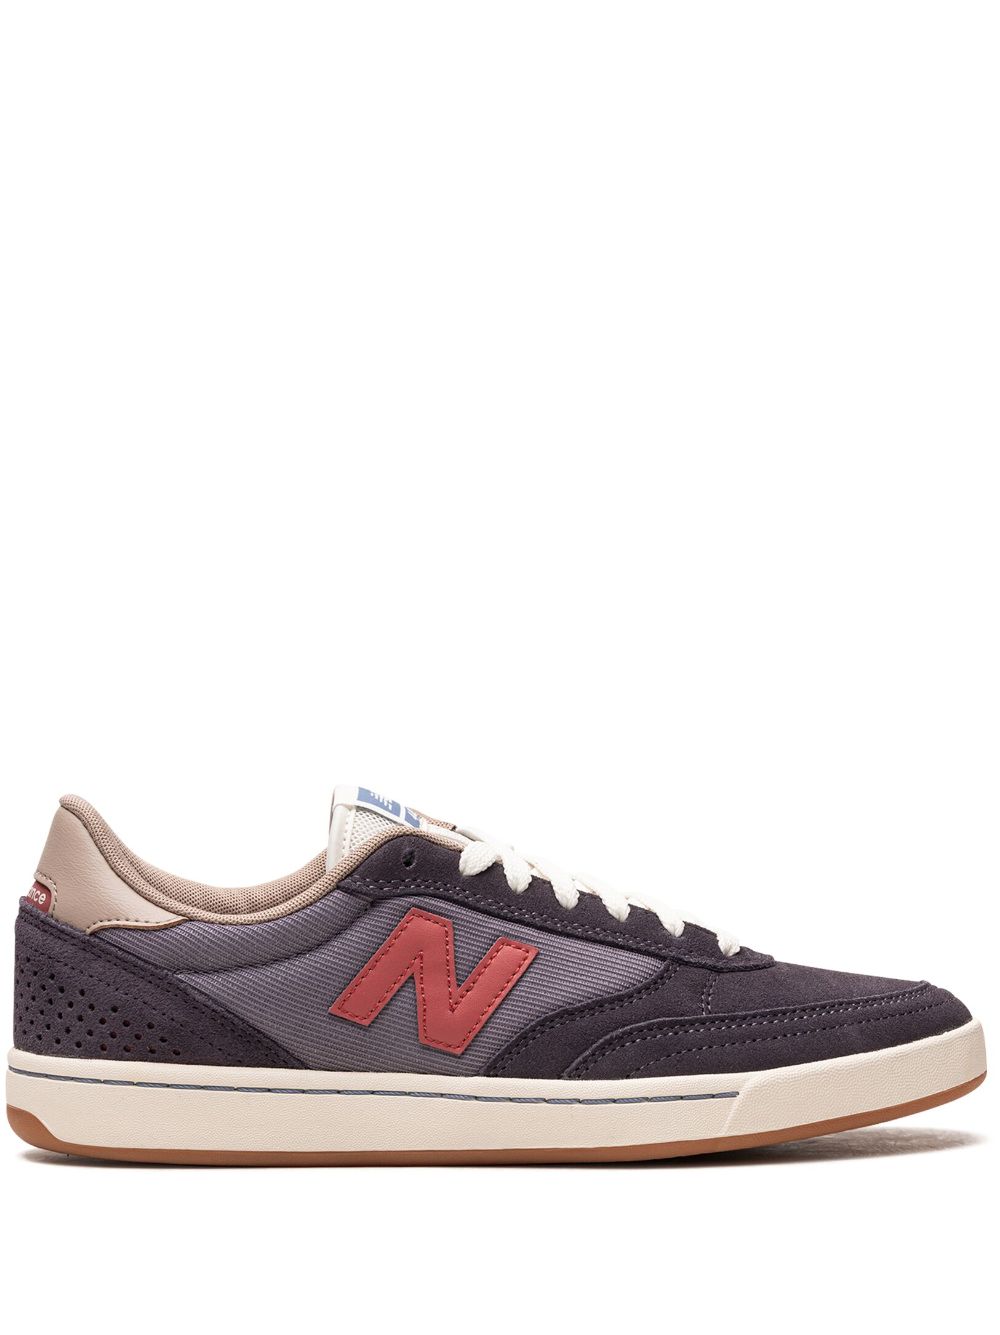 New Balance Numeric 440 "Navy/Red" sneakers - Purple